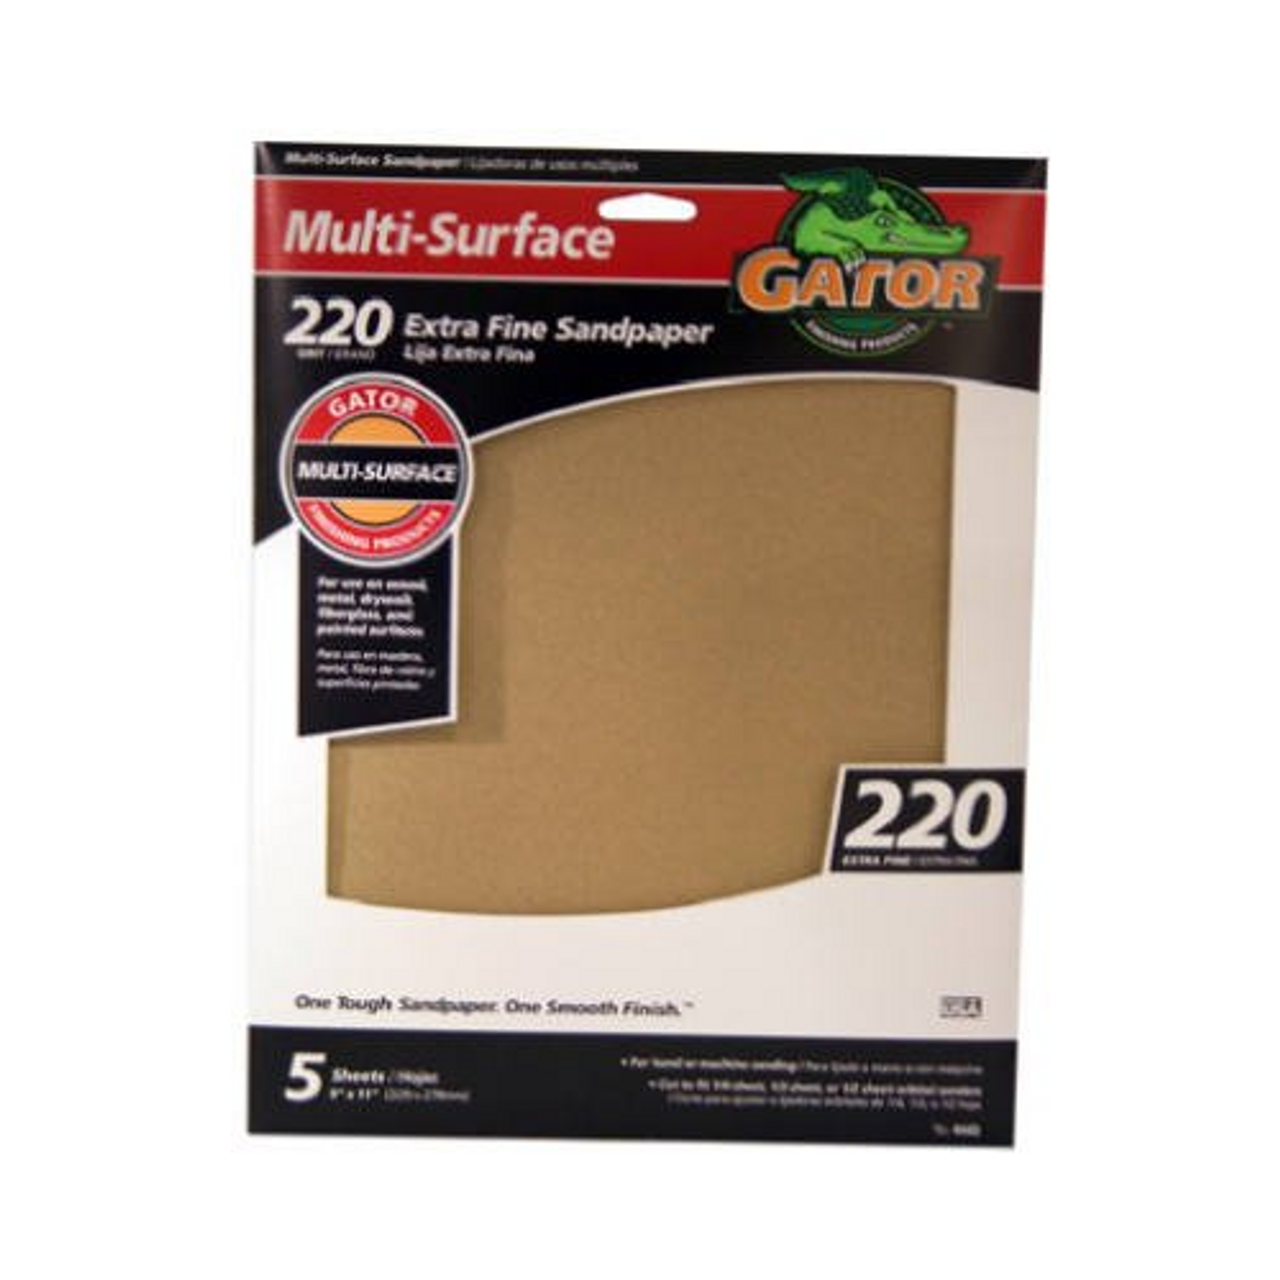 Gator (4443) 220 Very Fine Grit 9-Inch x 11-Inch Sandpaper - 1 Pack of 5 Sheets